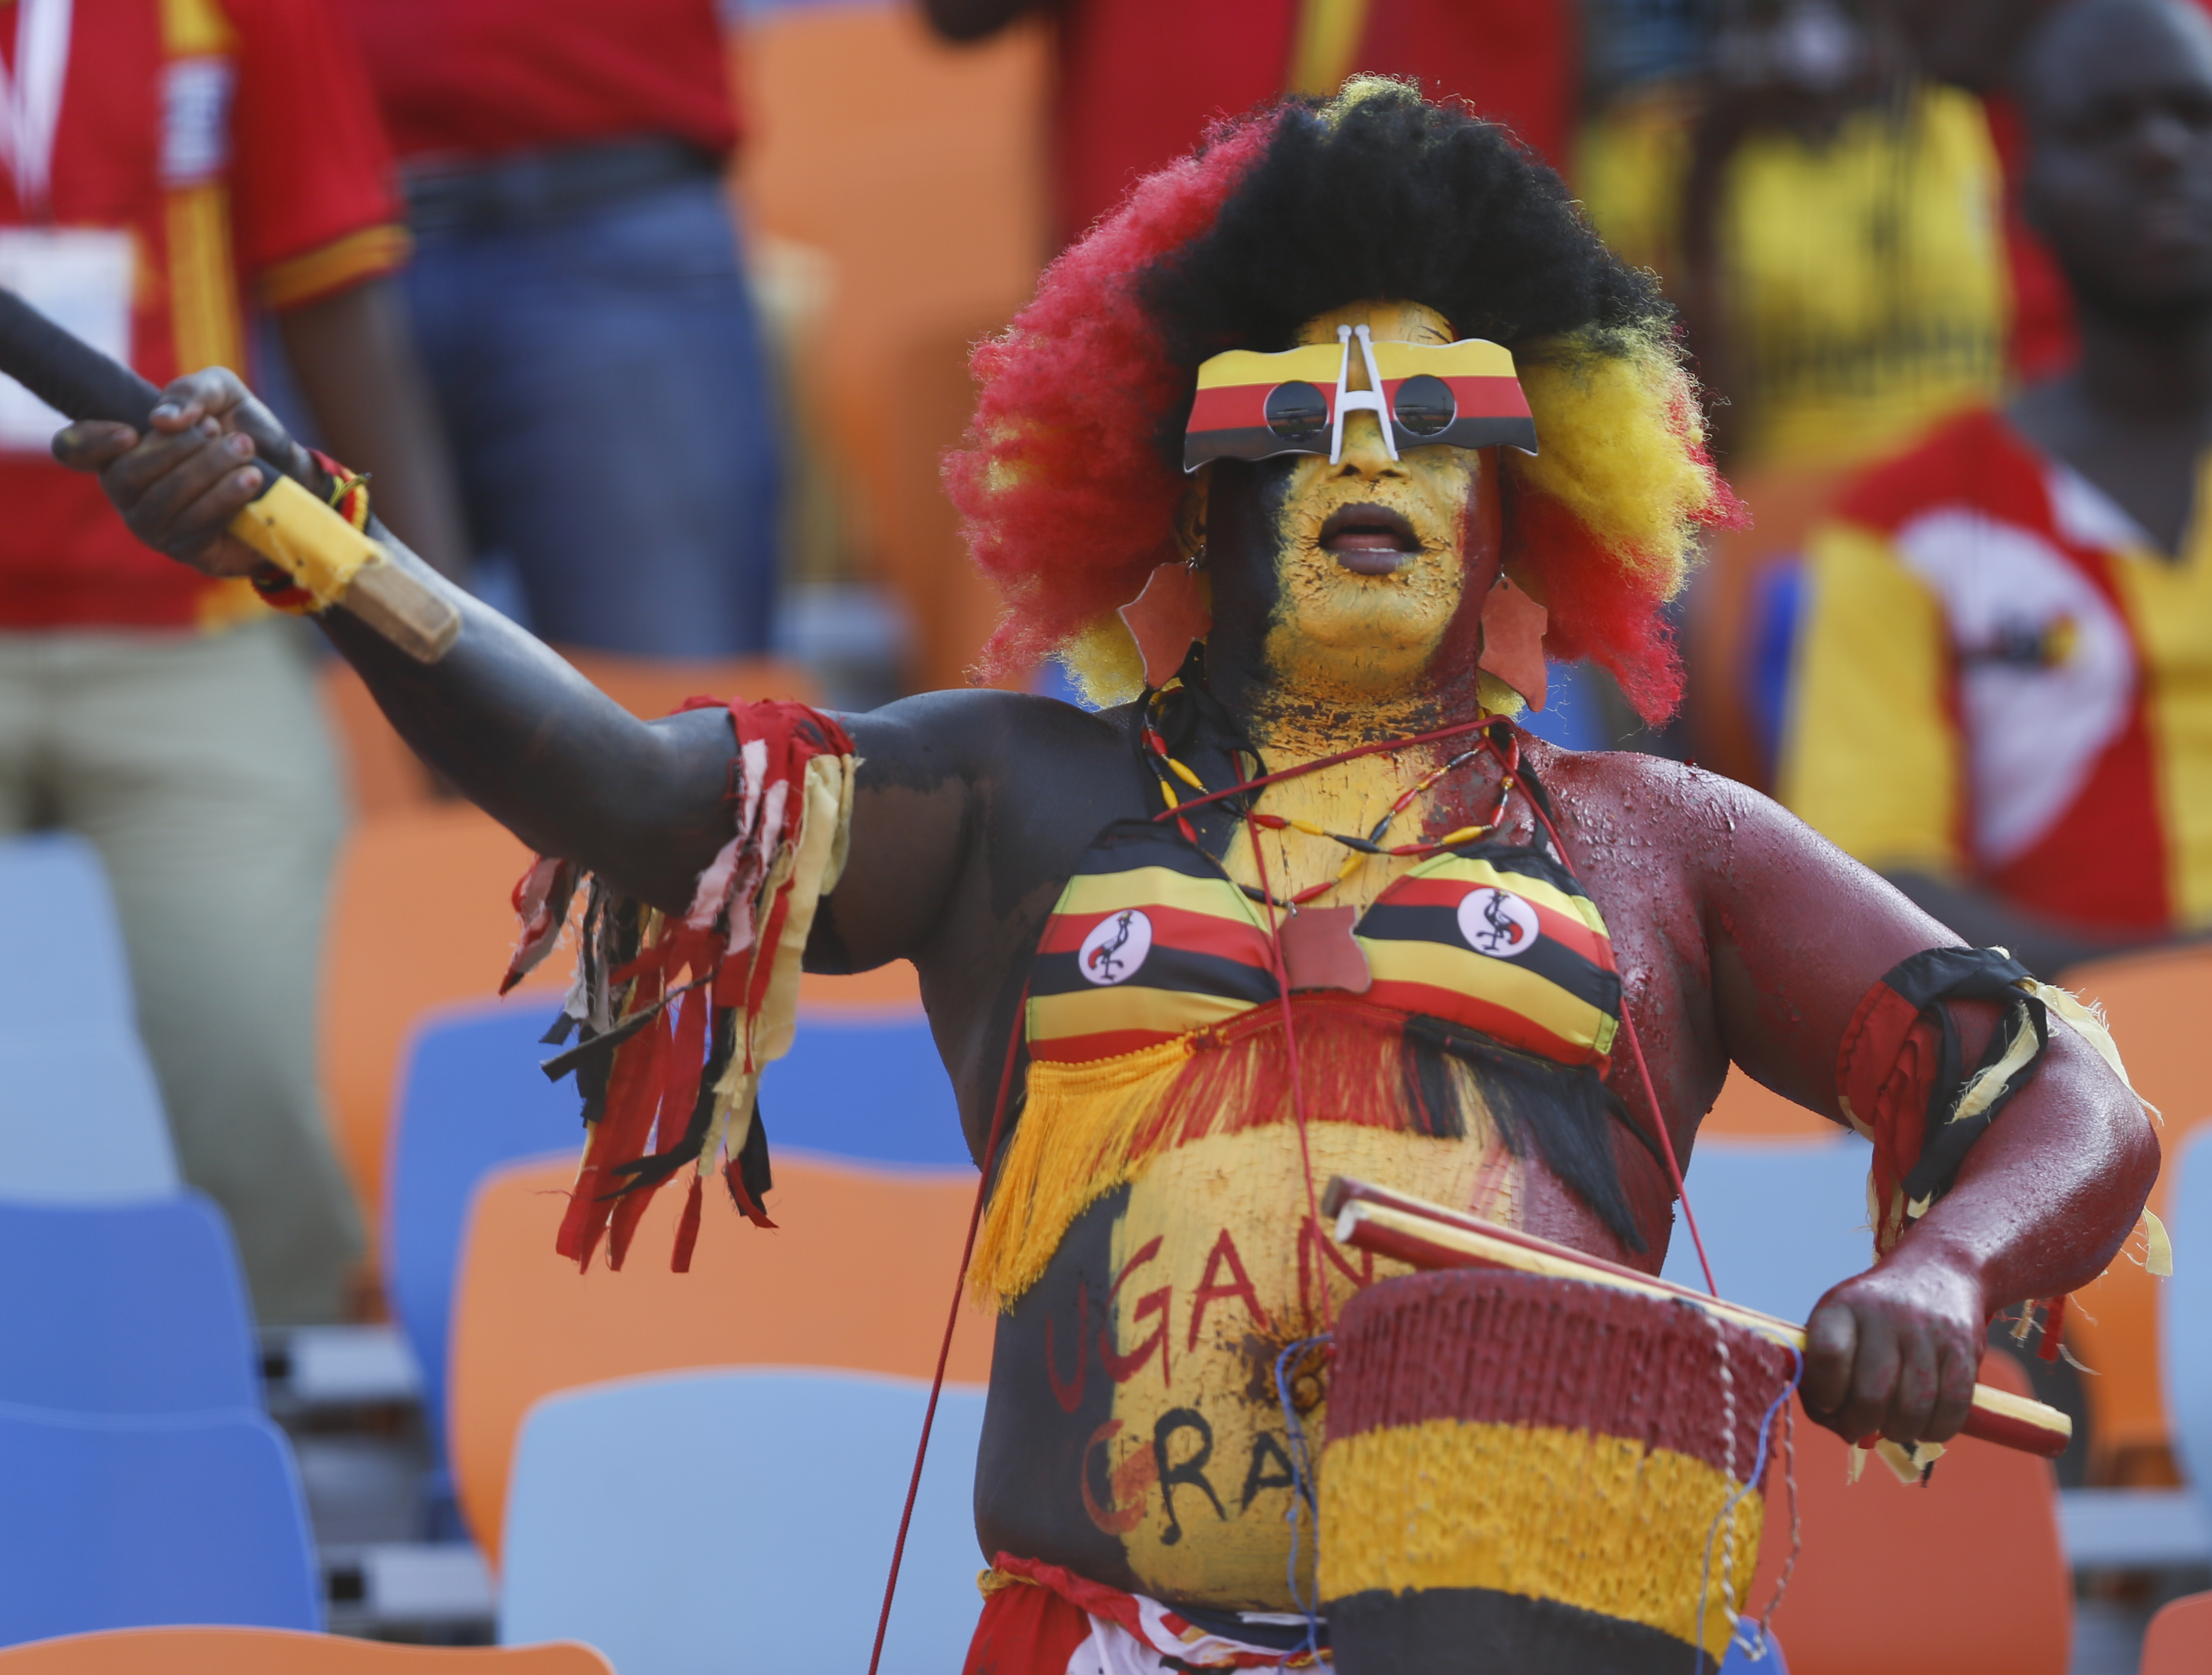 Ugandan fan cheers before the African Cup of Nations group A soccer match between DR Congo and Uganda at Cairo International Stadium in Cairo, Egypt, Saturday, June 22, 2019. (AP Photo/Ariel Schalit)